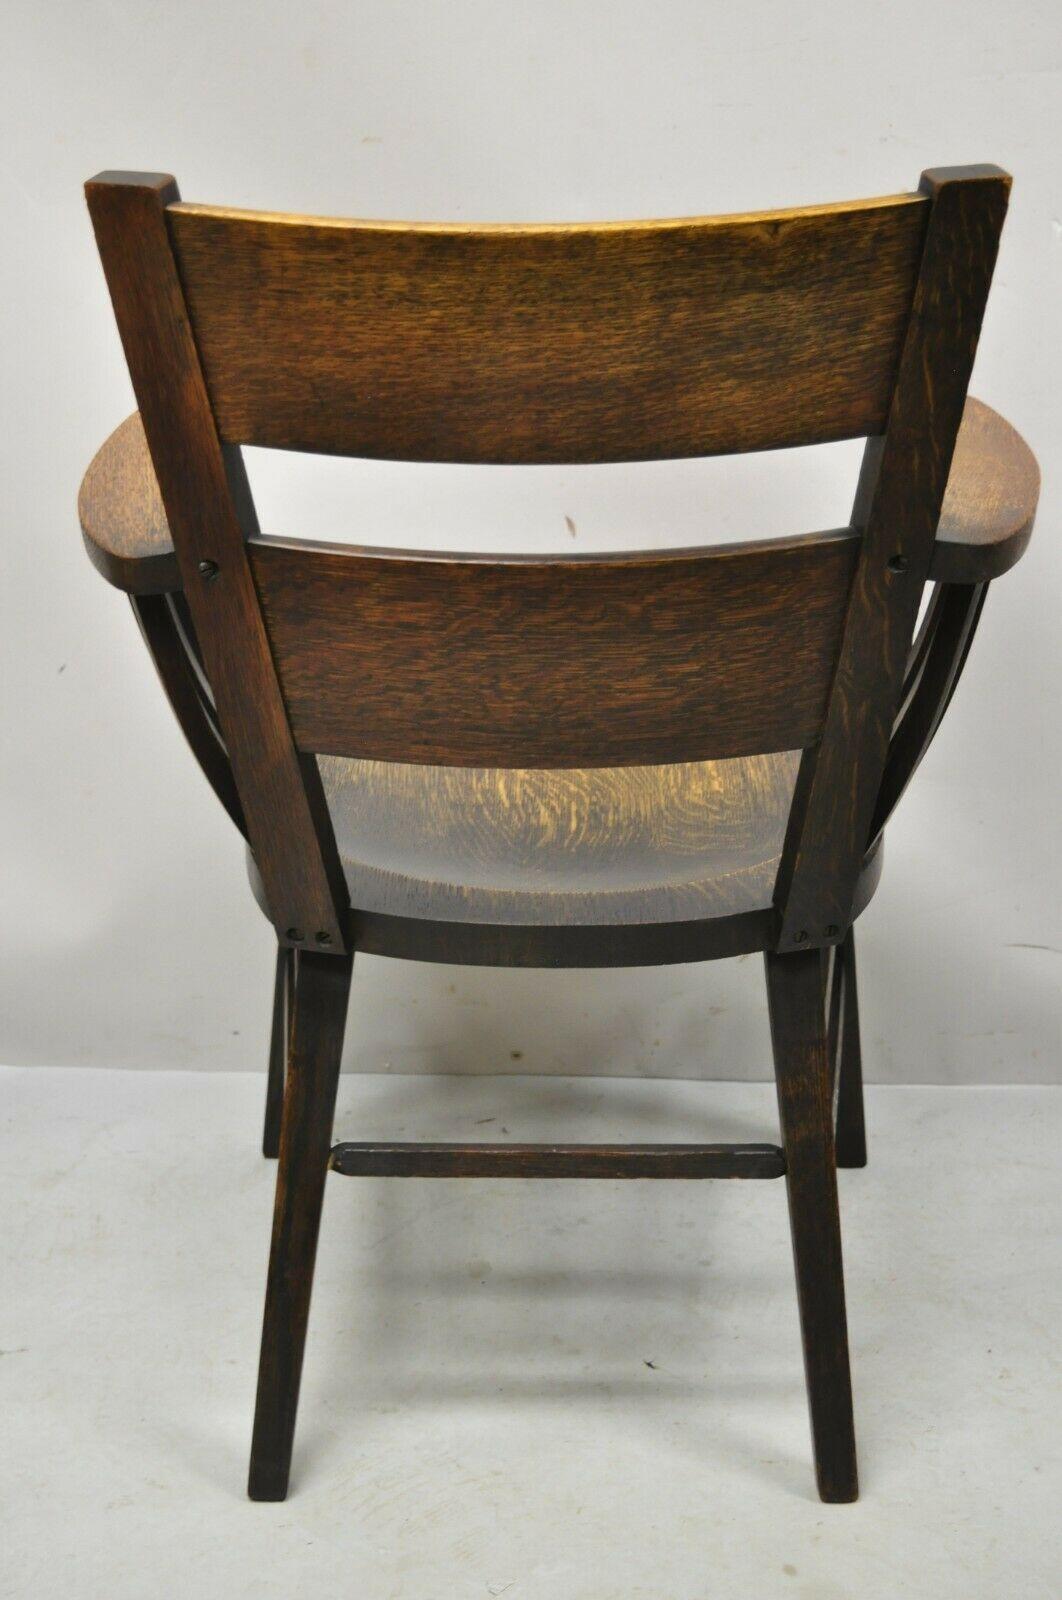 Antique Arts & Crafts Mission Oak Bowed Spindle Plank Seat Arm Chair For Sale 5